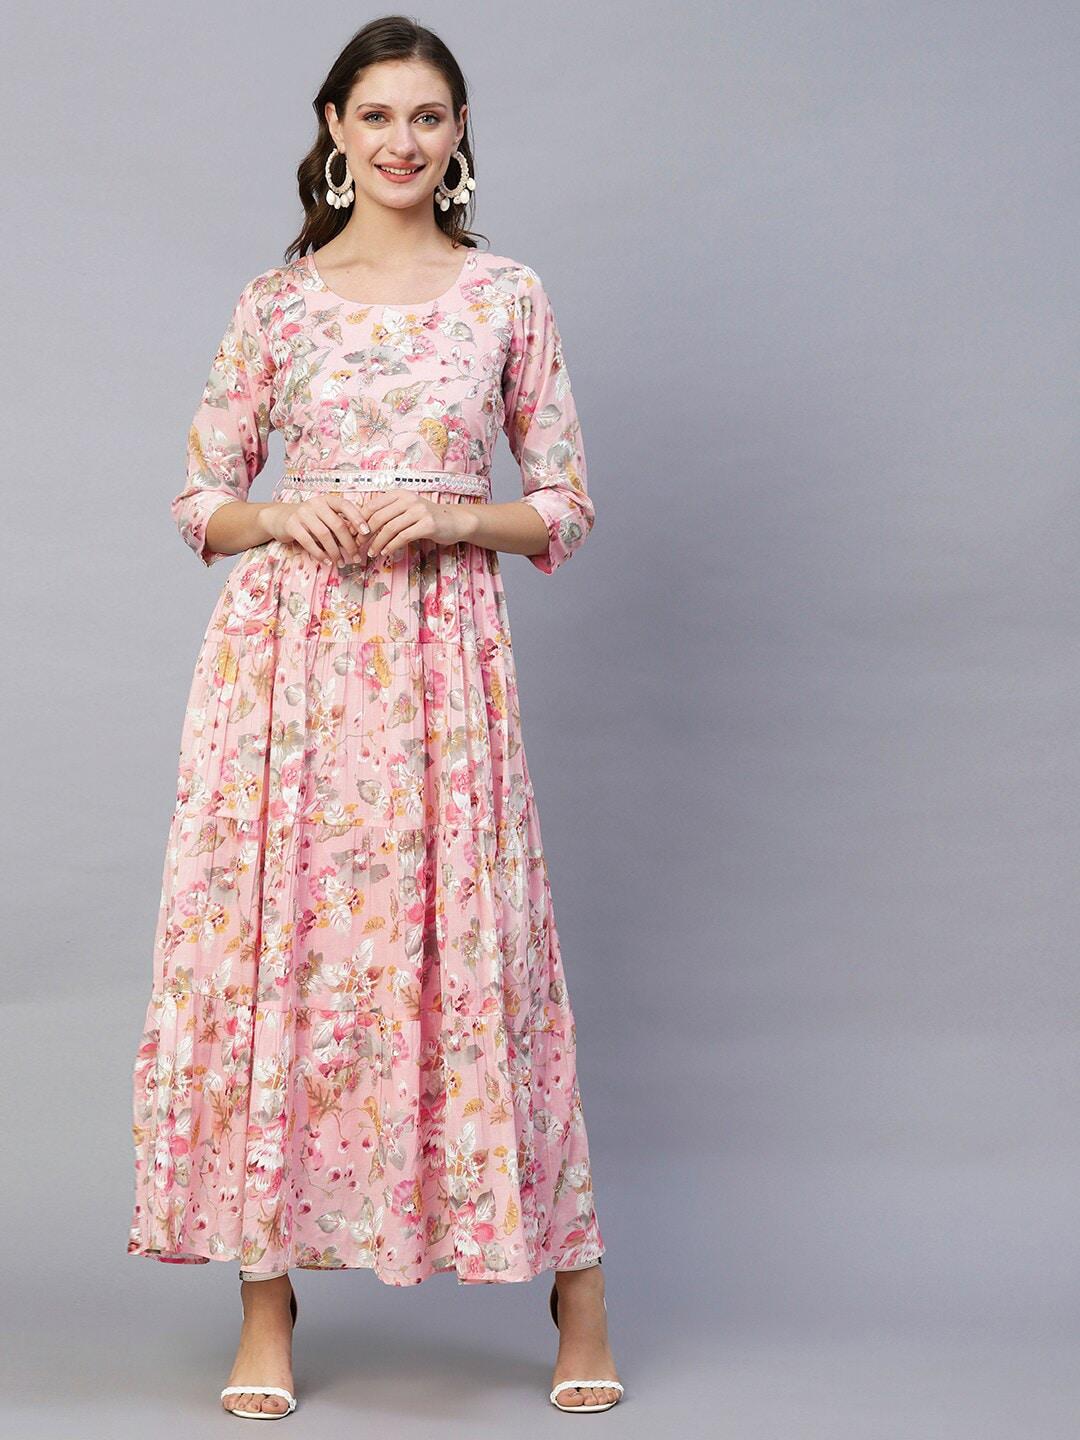 fashor-pink-floral-printed-gathered-or-pleated-cotton-maxi-dress